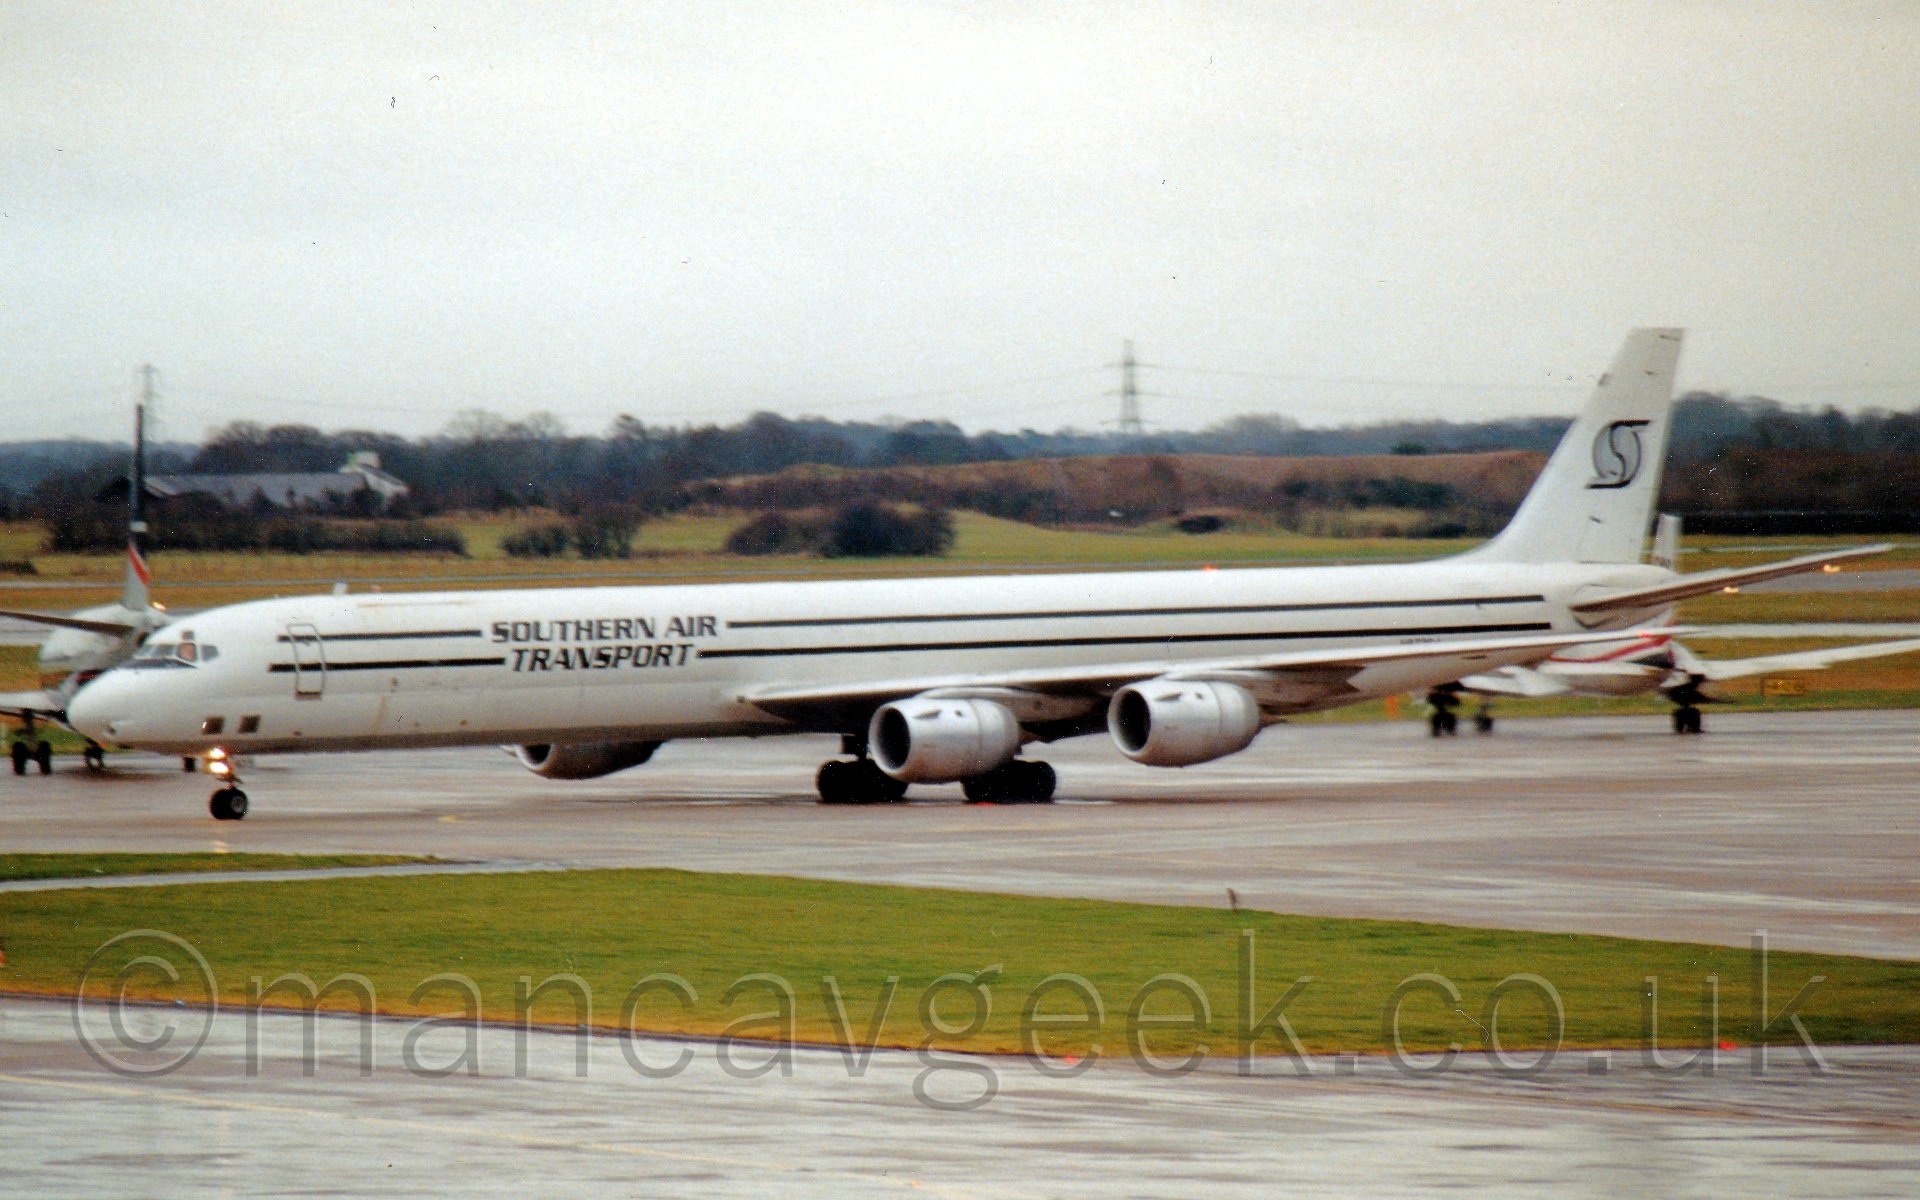 Side view of a rather long and thin 4 engined cargo jetliner taxiing from right to left. The plane is mostly white, with a silver belly, and 2 black stripes running along the top and bottom of the fuselage, with "Southern Air transport" titles overlaid. The tail has a grey circle overlaid with a black letter "S". In the background, a couplke of planes are facing away from the camera, one on each edge of the frame. In the distance, fields and trees lead off i to the distance. under a bright white sky.